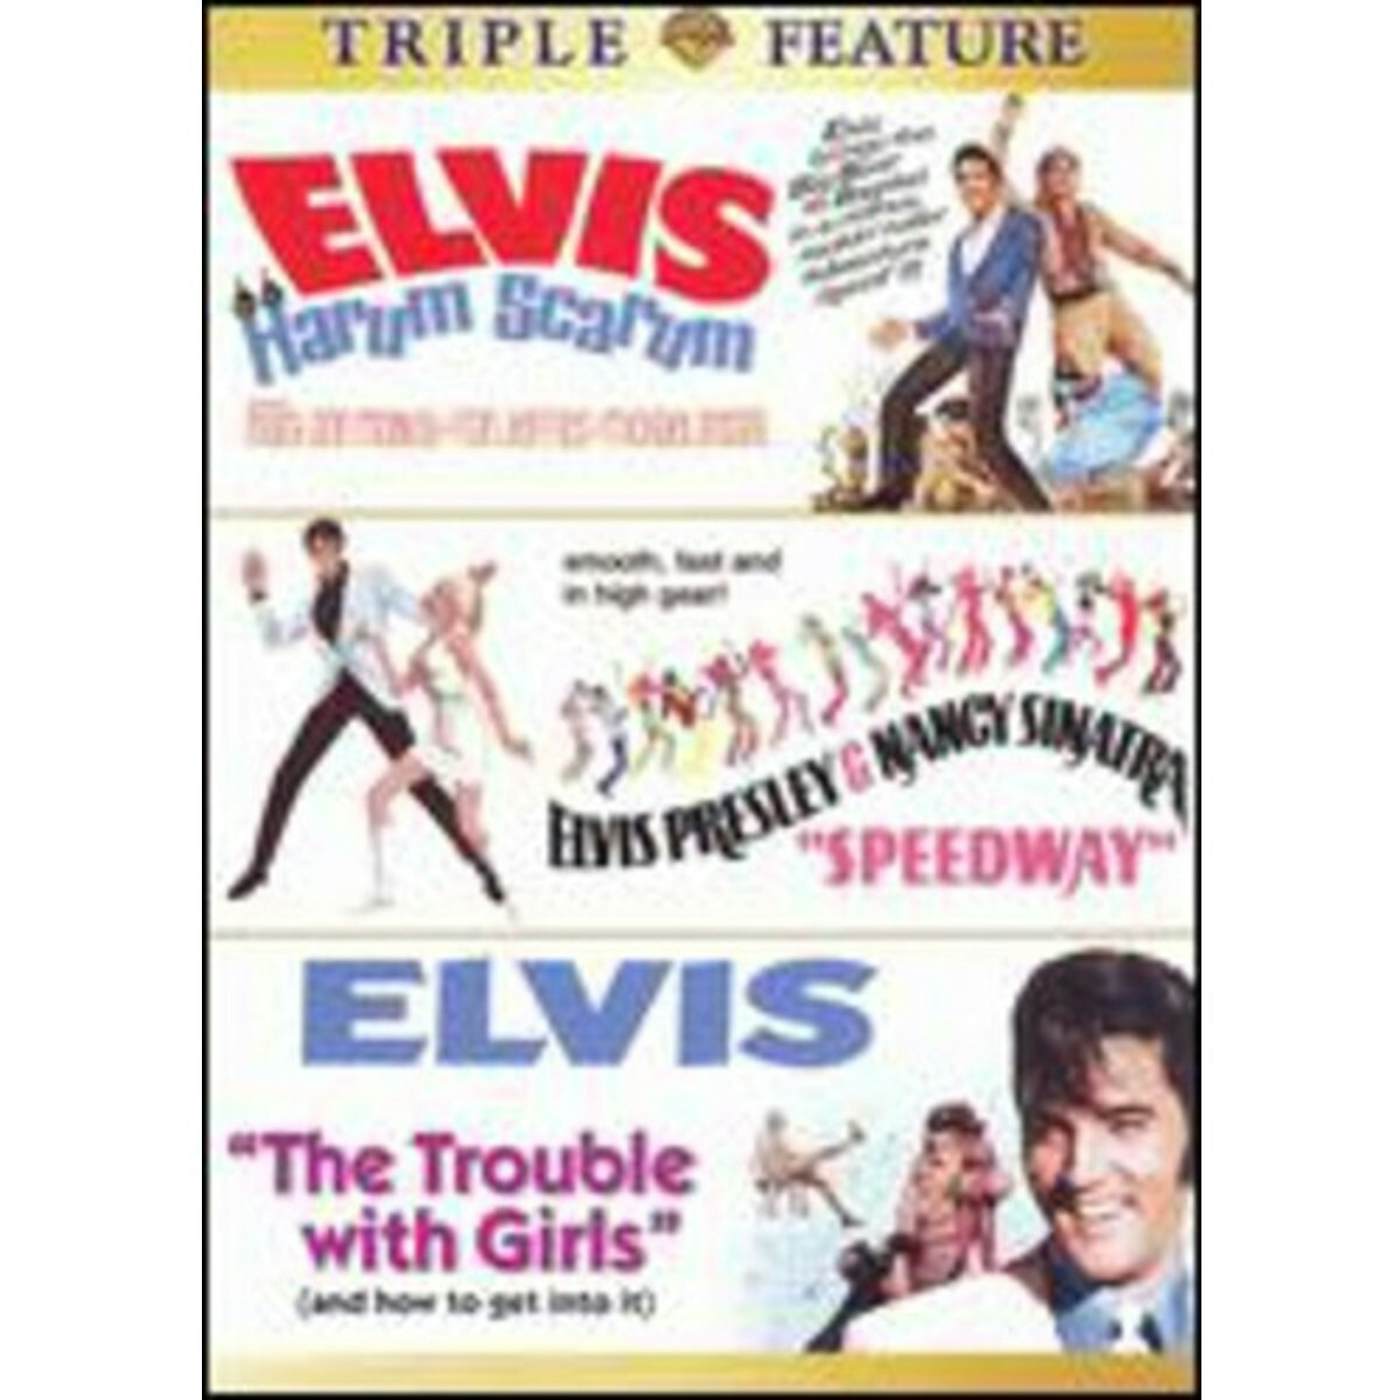 Elvis Presley Harum Scarum / Speedway / The Trouble With Girls (And How to Get Into It) DVD